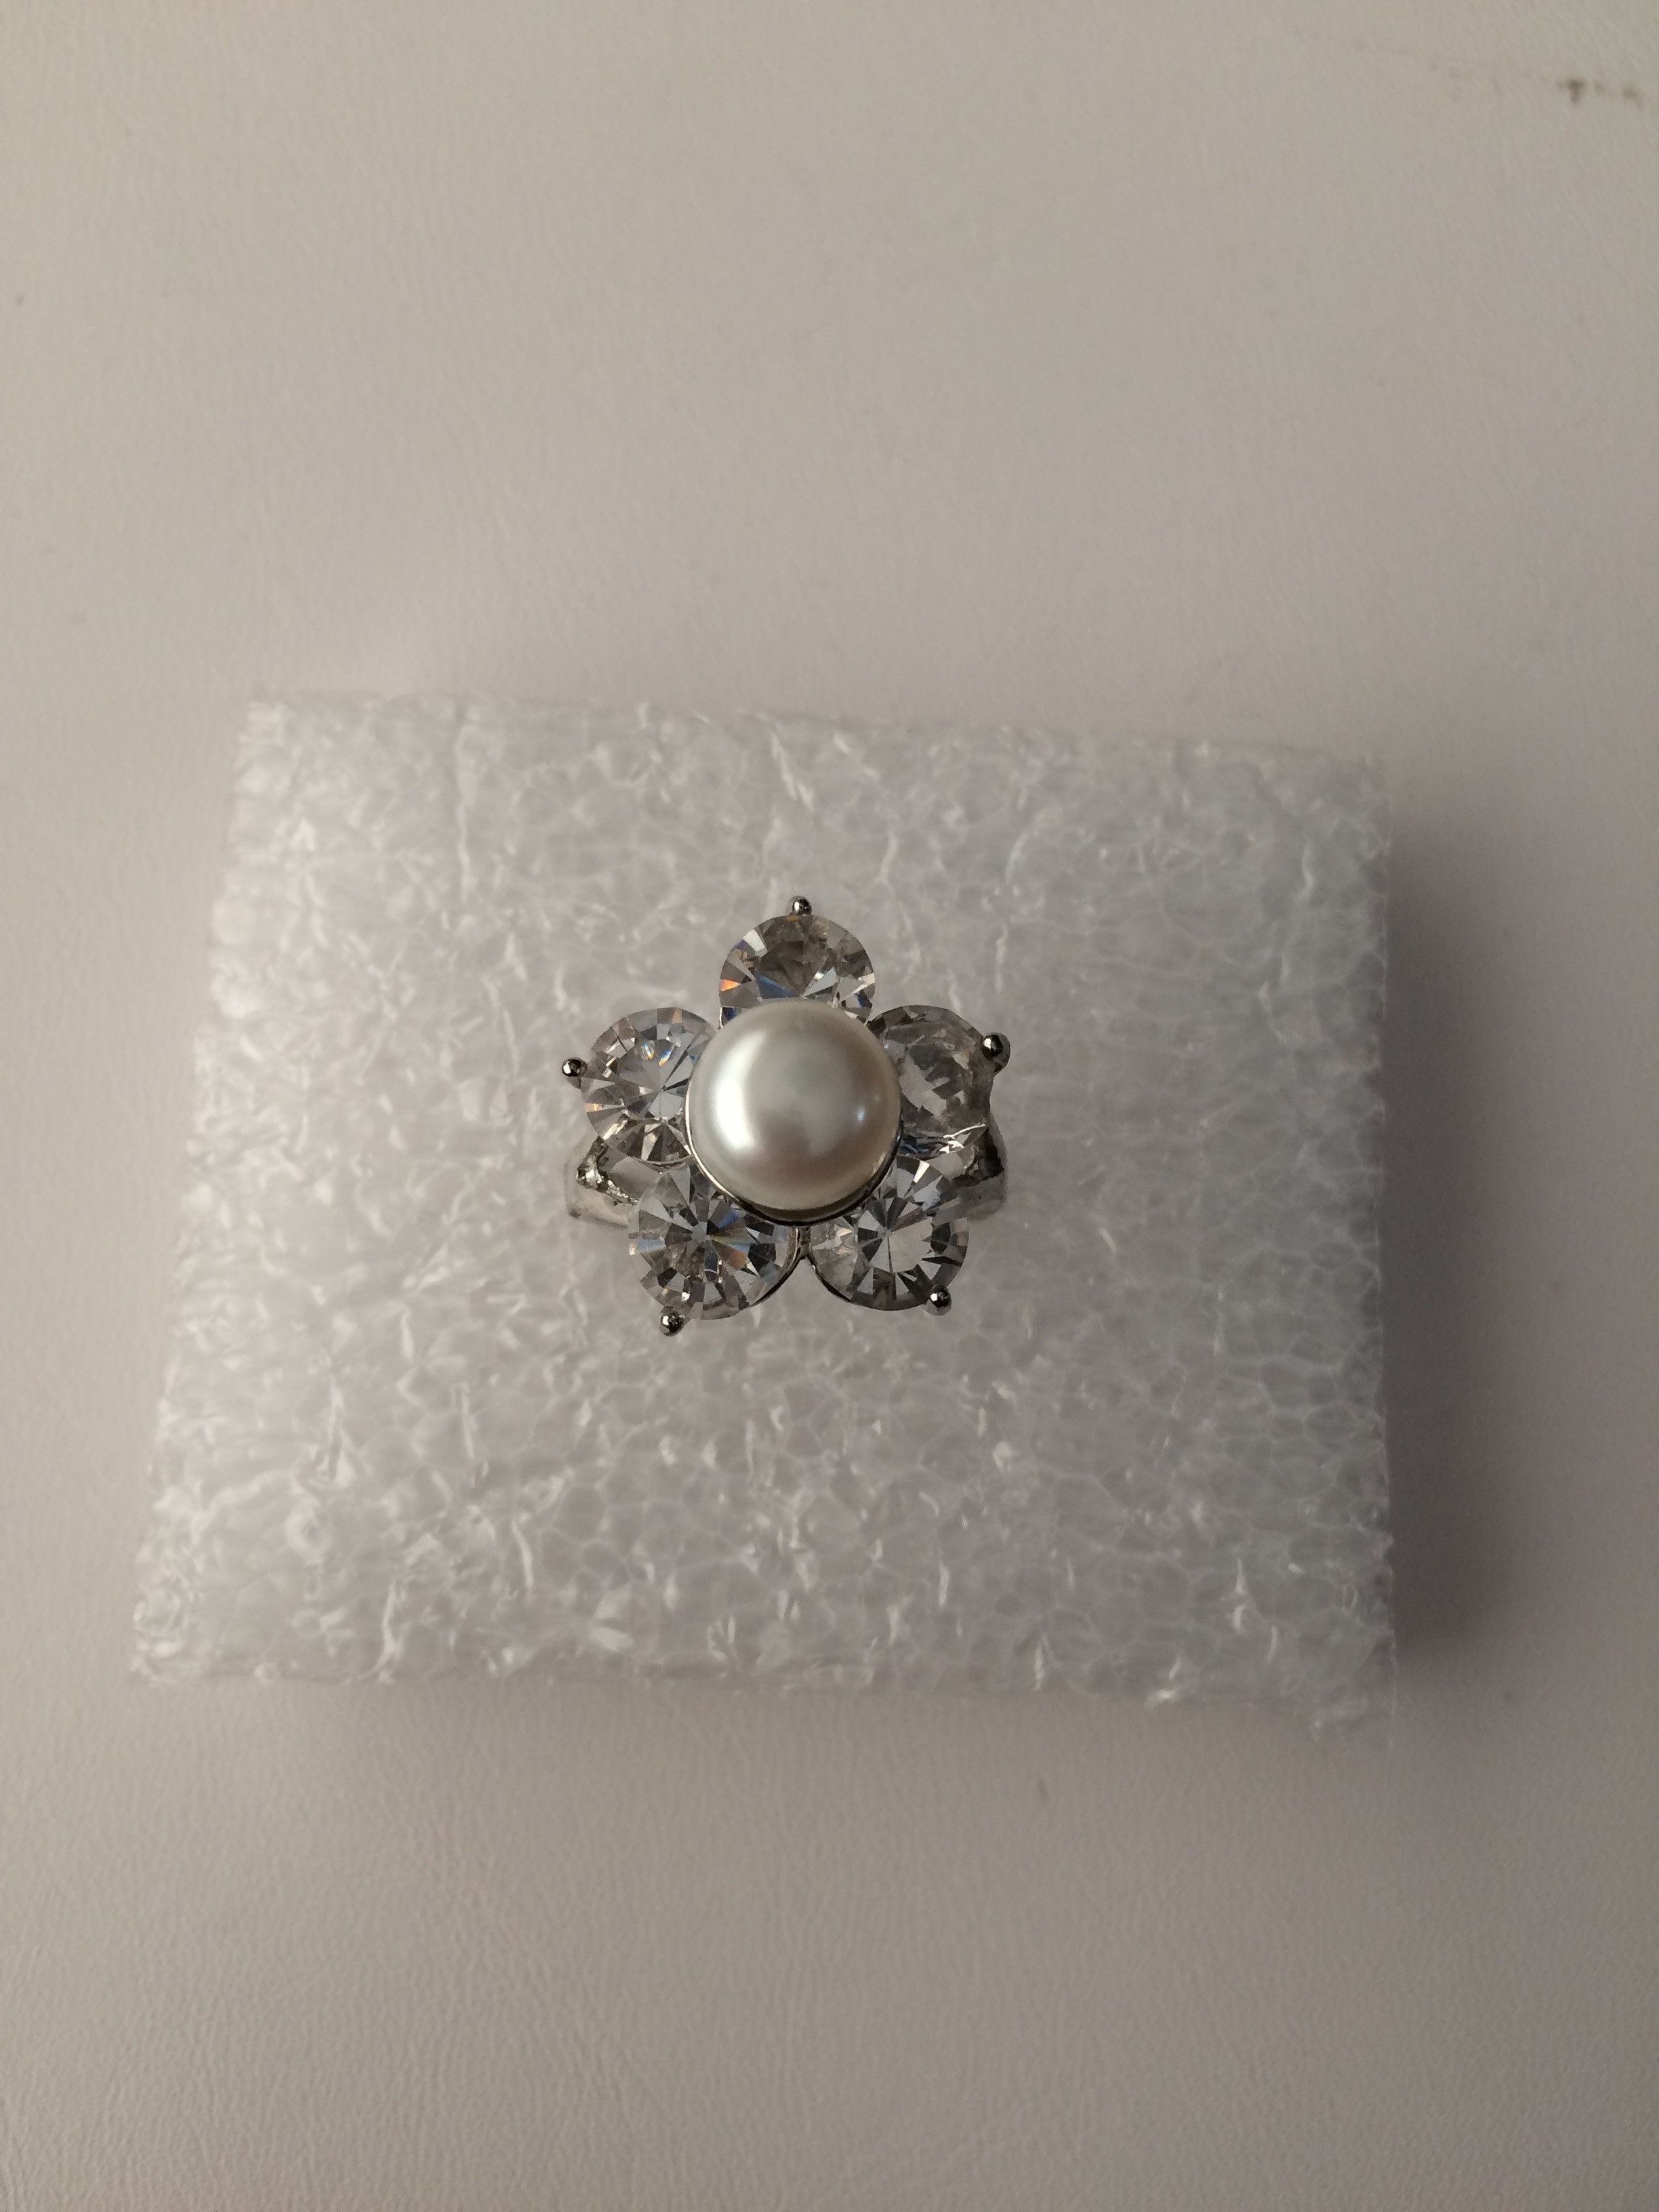 Silver White Pearl Bead Ring with CZs - Size 8.5 Size ONE SIZE - 1 Preview